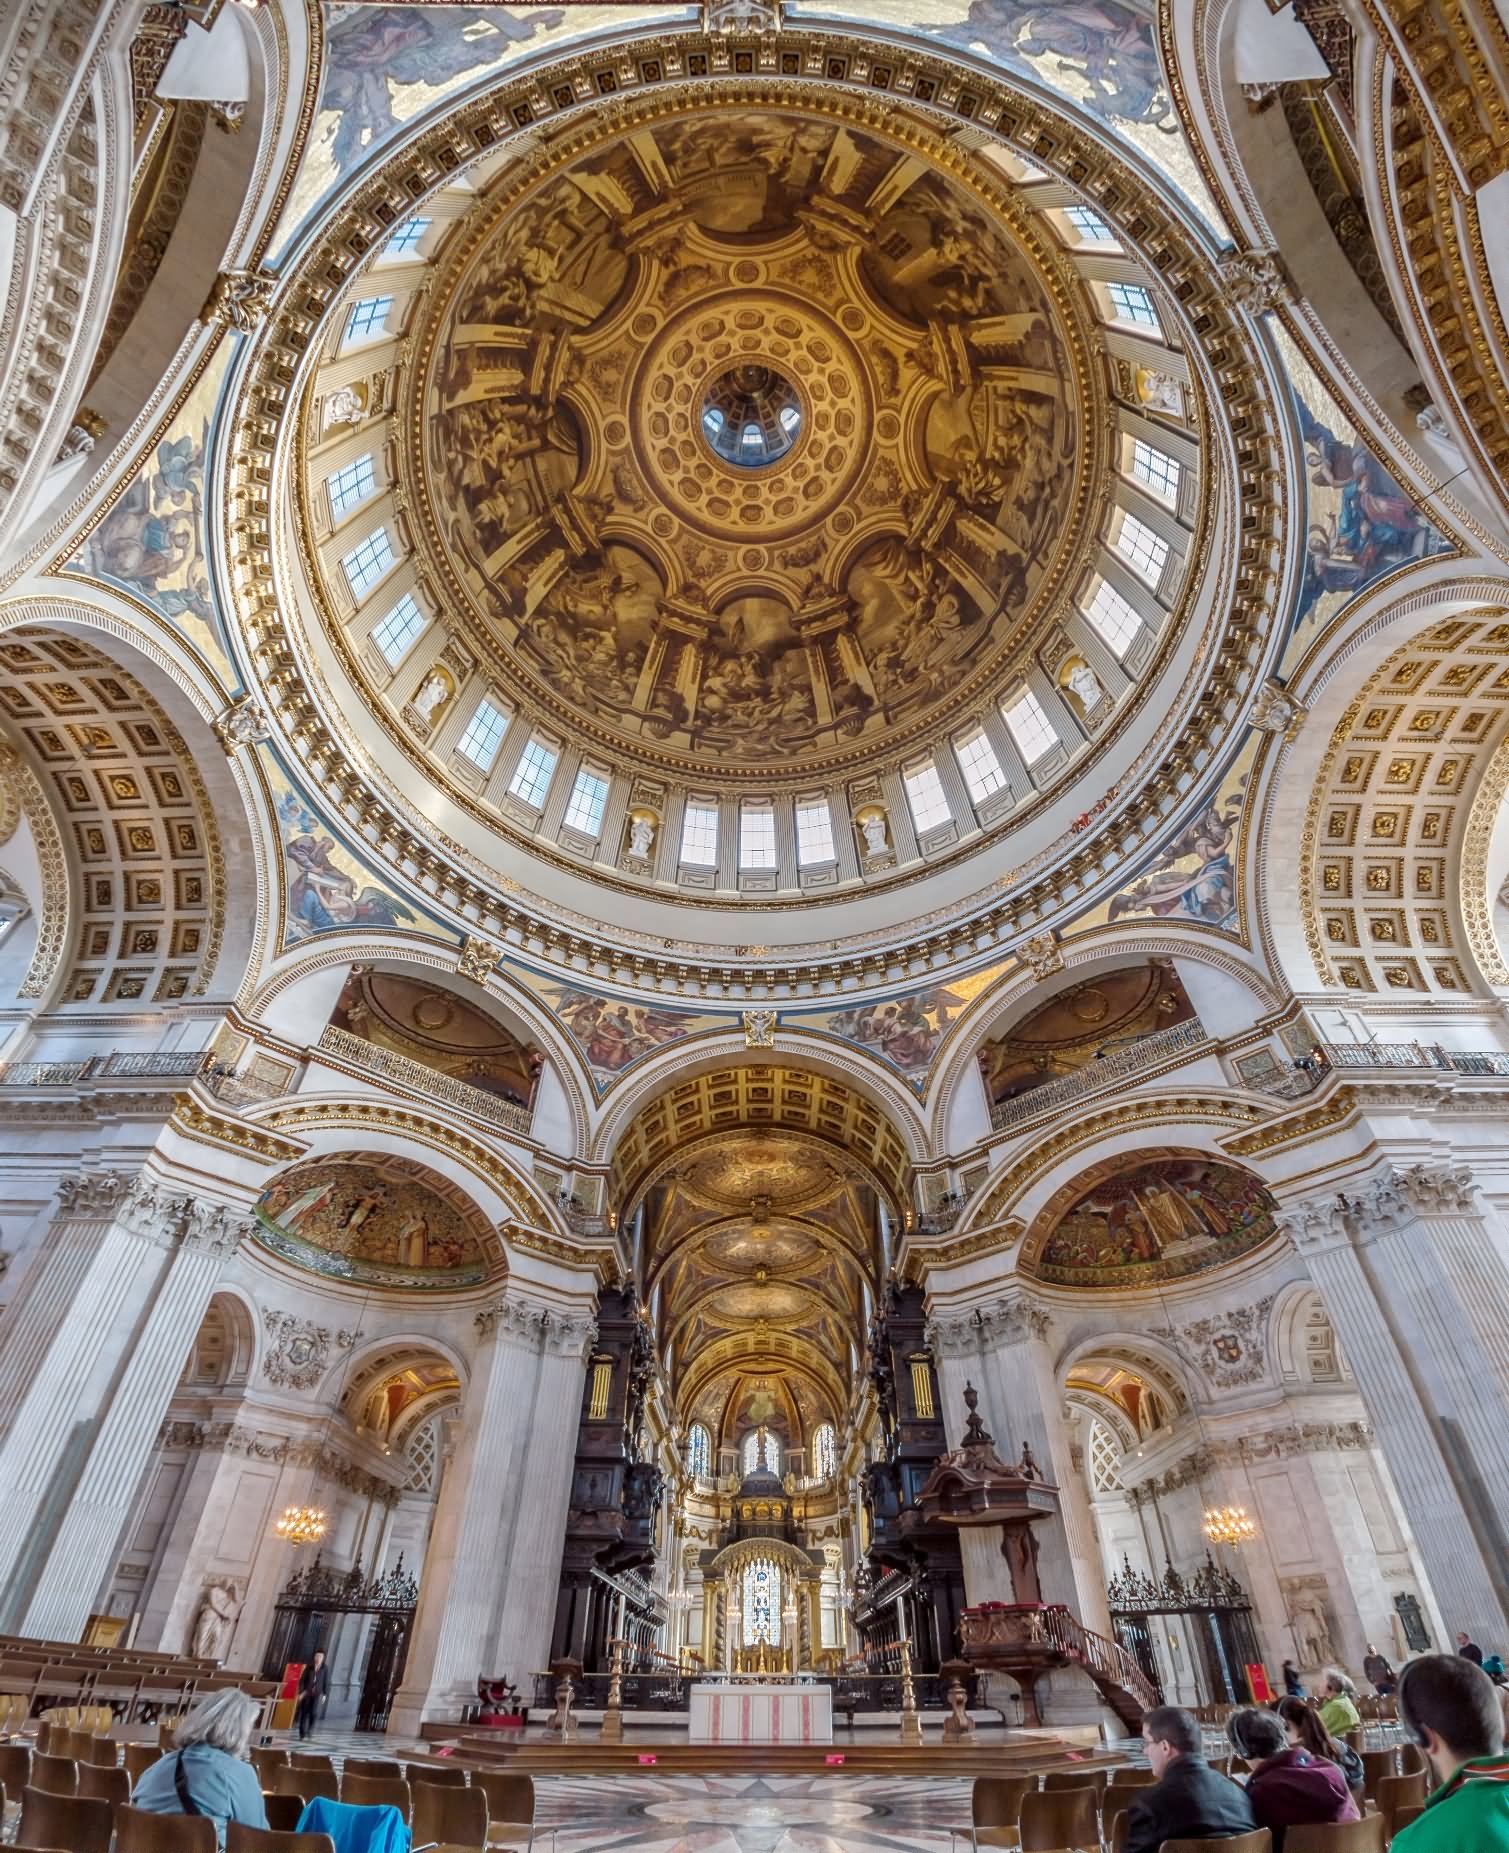 Amazing Dome Inside Of The St Paul's Cathedral